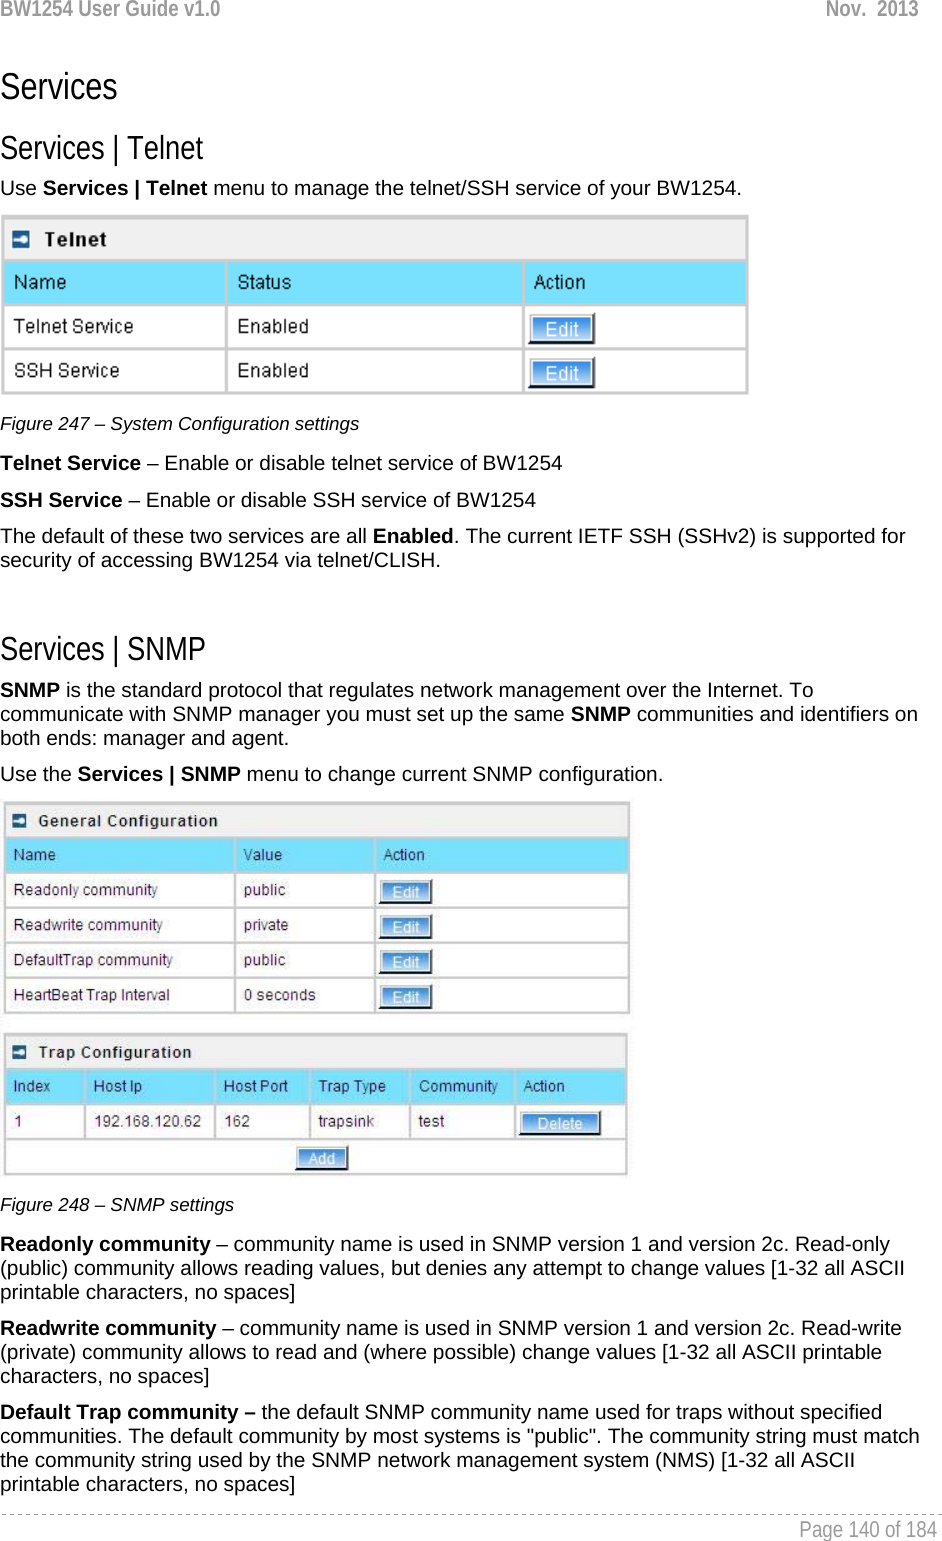 BW1254 User Guide v1.0  Nov.  2013     Page 140 of 184   Services Services | Telnet Use Services | Telnet menu to manage the telnet/SSH service of your BW1254.   Figure 247 – System Configuration settings Telnet Service – Enable or disable telnet service of BW1254 SSH Service – Enable or disable SSH service of BW1254 The default of these two services are all Enabled. The current IETF SSH (SSHv2) is supported for security of accessing BW1254 via telnet/CLISH.   Services | SNMP SNMP is the standard protocol that regulates network management over the Internet. To communicate with SNMP manager you must set up the same SNMP communities and identifiers on both ends: manager and agent. Use the Services | SNMP menu to change current SNMP configuration.  Figure 248 – SNMP settings Readonly community – community name is used in SNMP version 1 and version 2c. Read-only (public) community allows reading values, but denies any attempt to change values [1-32 all ASCII printable characters, no spaces] Readwrite community – community name is used in SNMP version 1 and version 2c. Read-write (private) community allows to read and (where possible) change values [1-32 all ASCII printable characters, no spaces] Default Trap community – the default SNMP community name used for traps without specified communities. The default community by most systems is &quot;public&quot;. The community string must match the community string used by the SNMP network management system (NMS) [1-32 all ASCII printable characters, no spaces] 